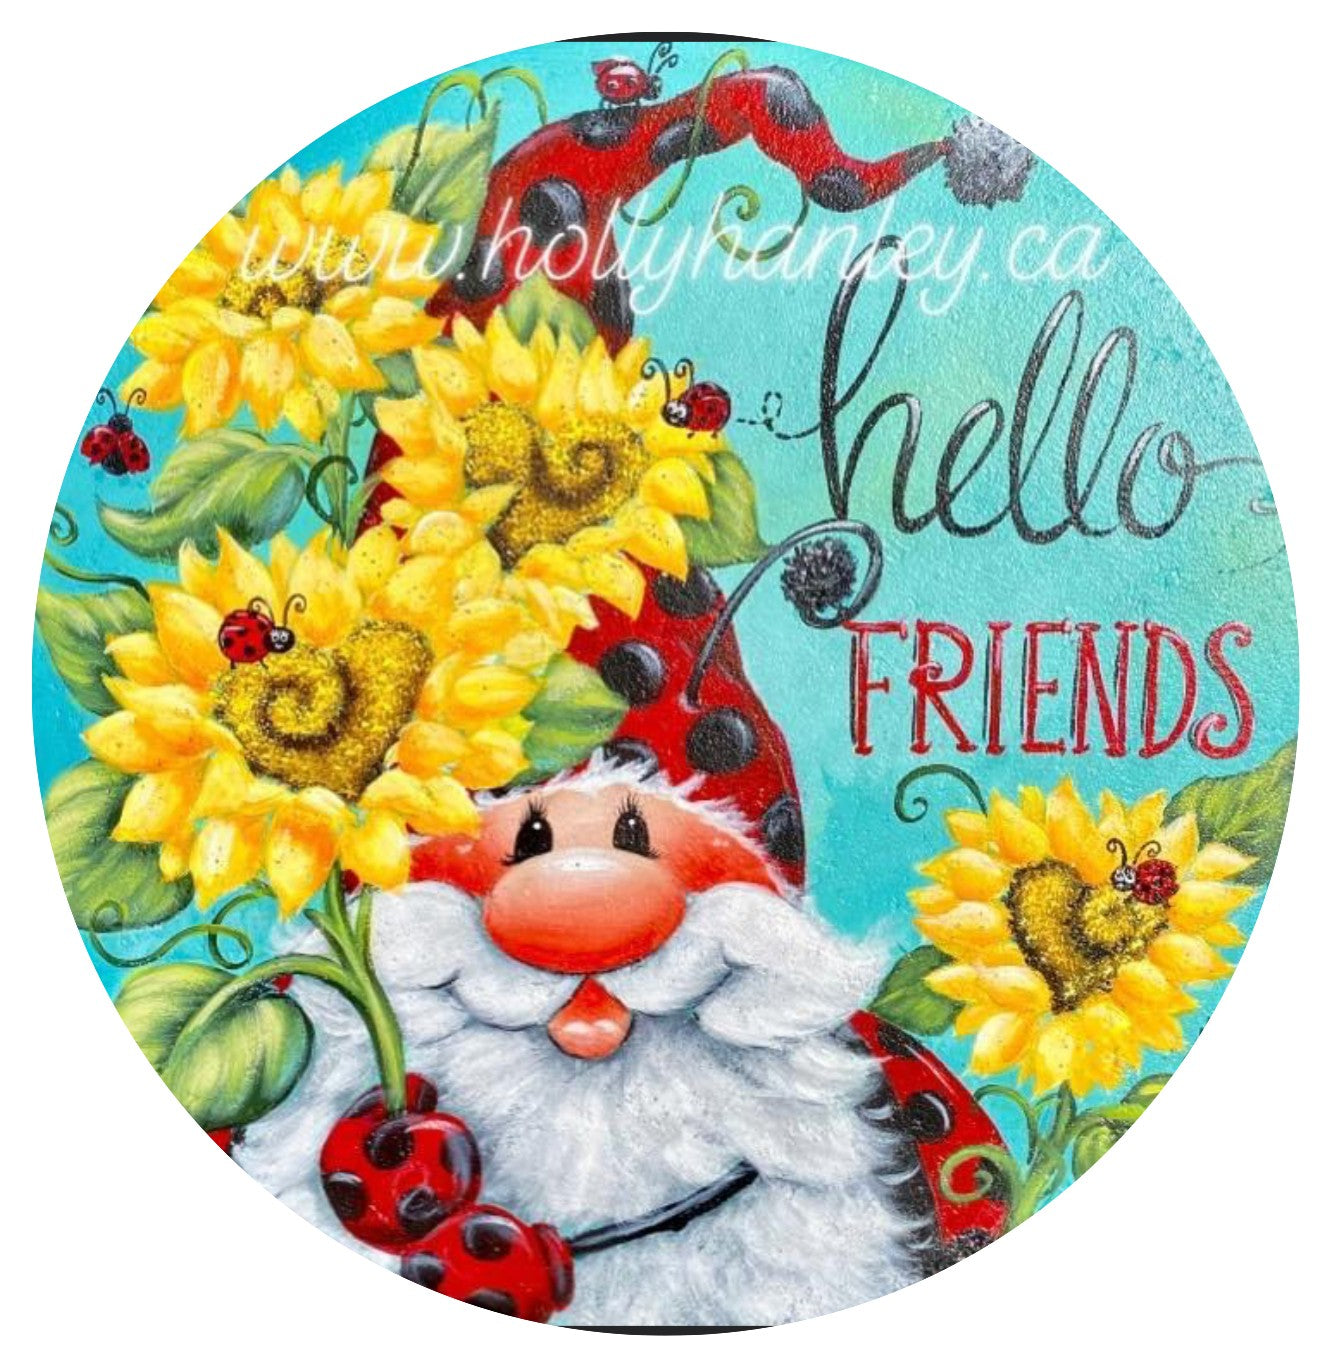 Hello friends ladybug gnome  ( Holly Hanley design) - Out of the Wood